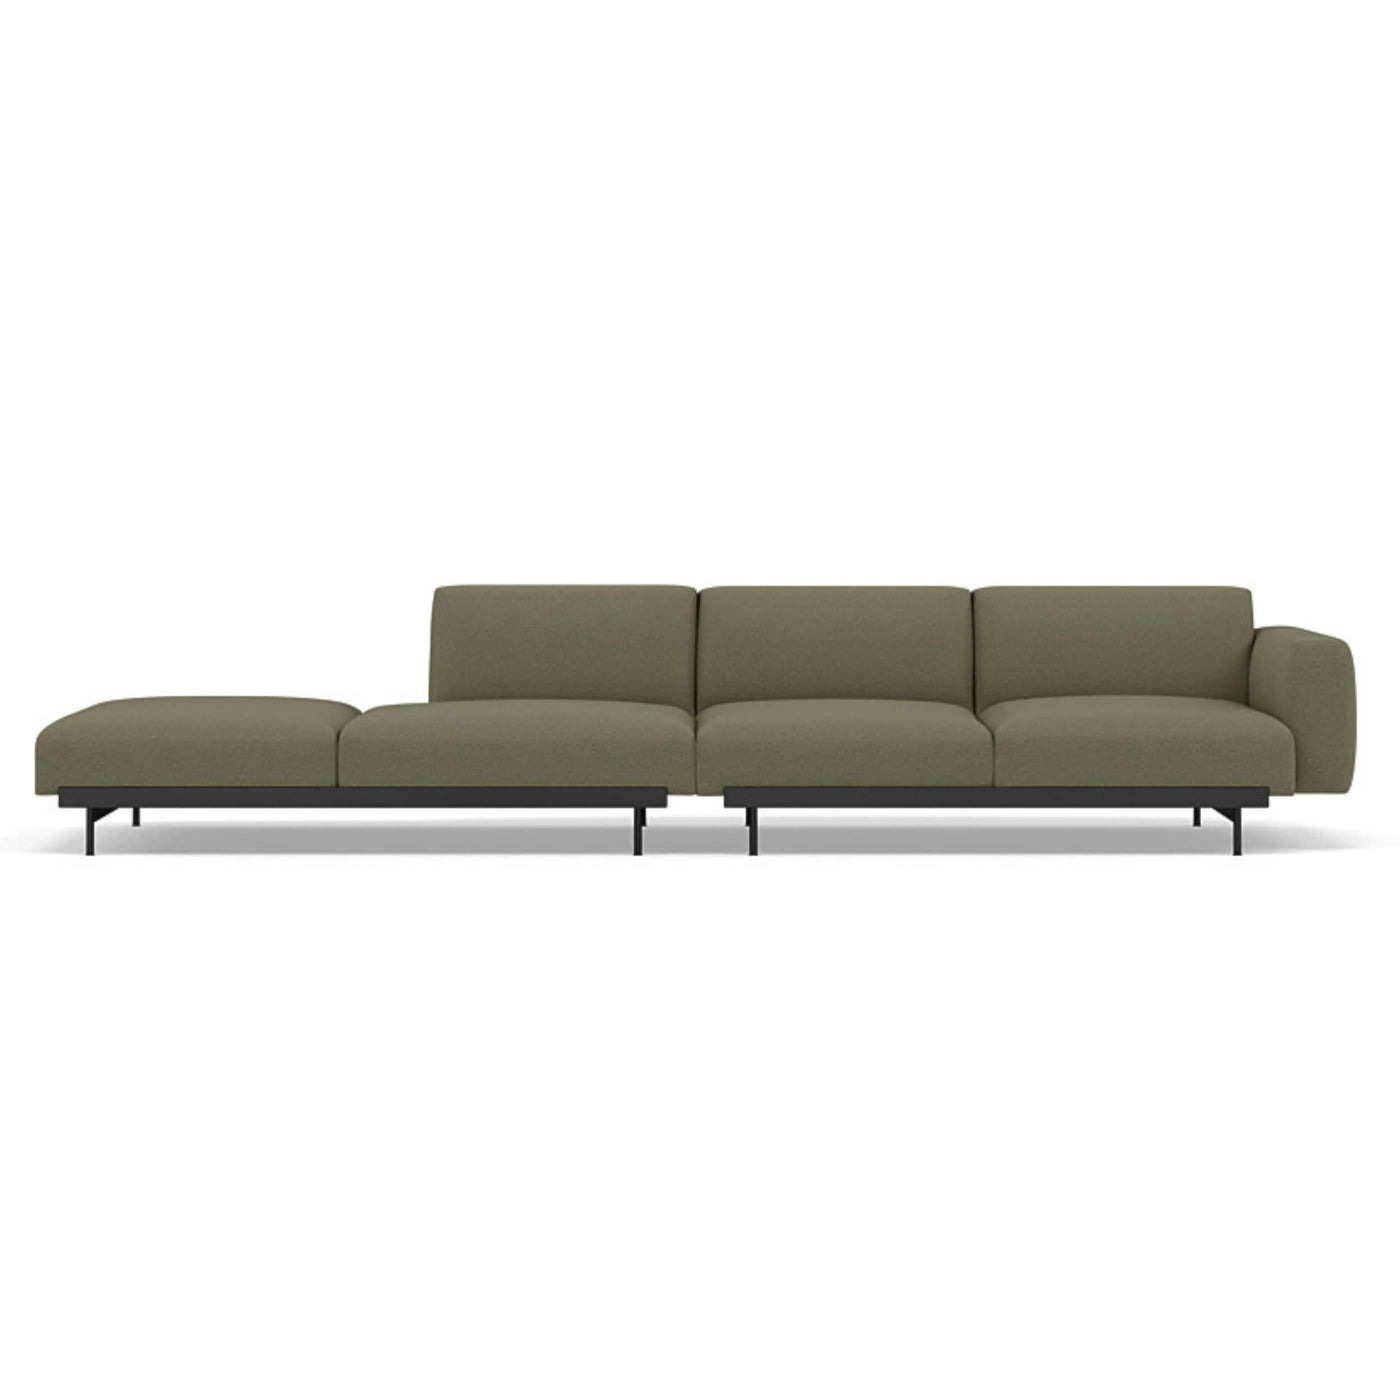 Muuto In Situ Modular 4 Seater Sofa configuration 3. Made to order from someday designs. #colour_clay-17